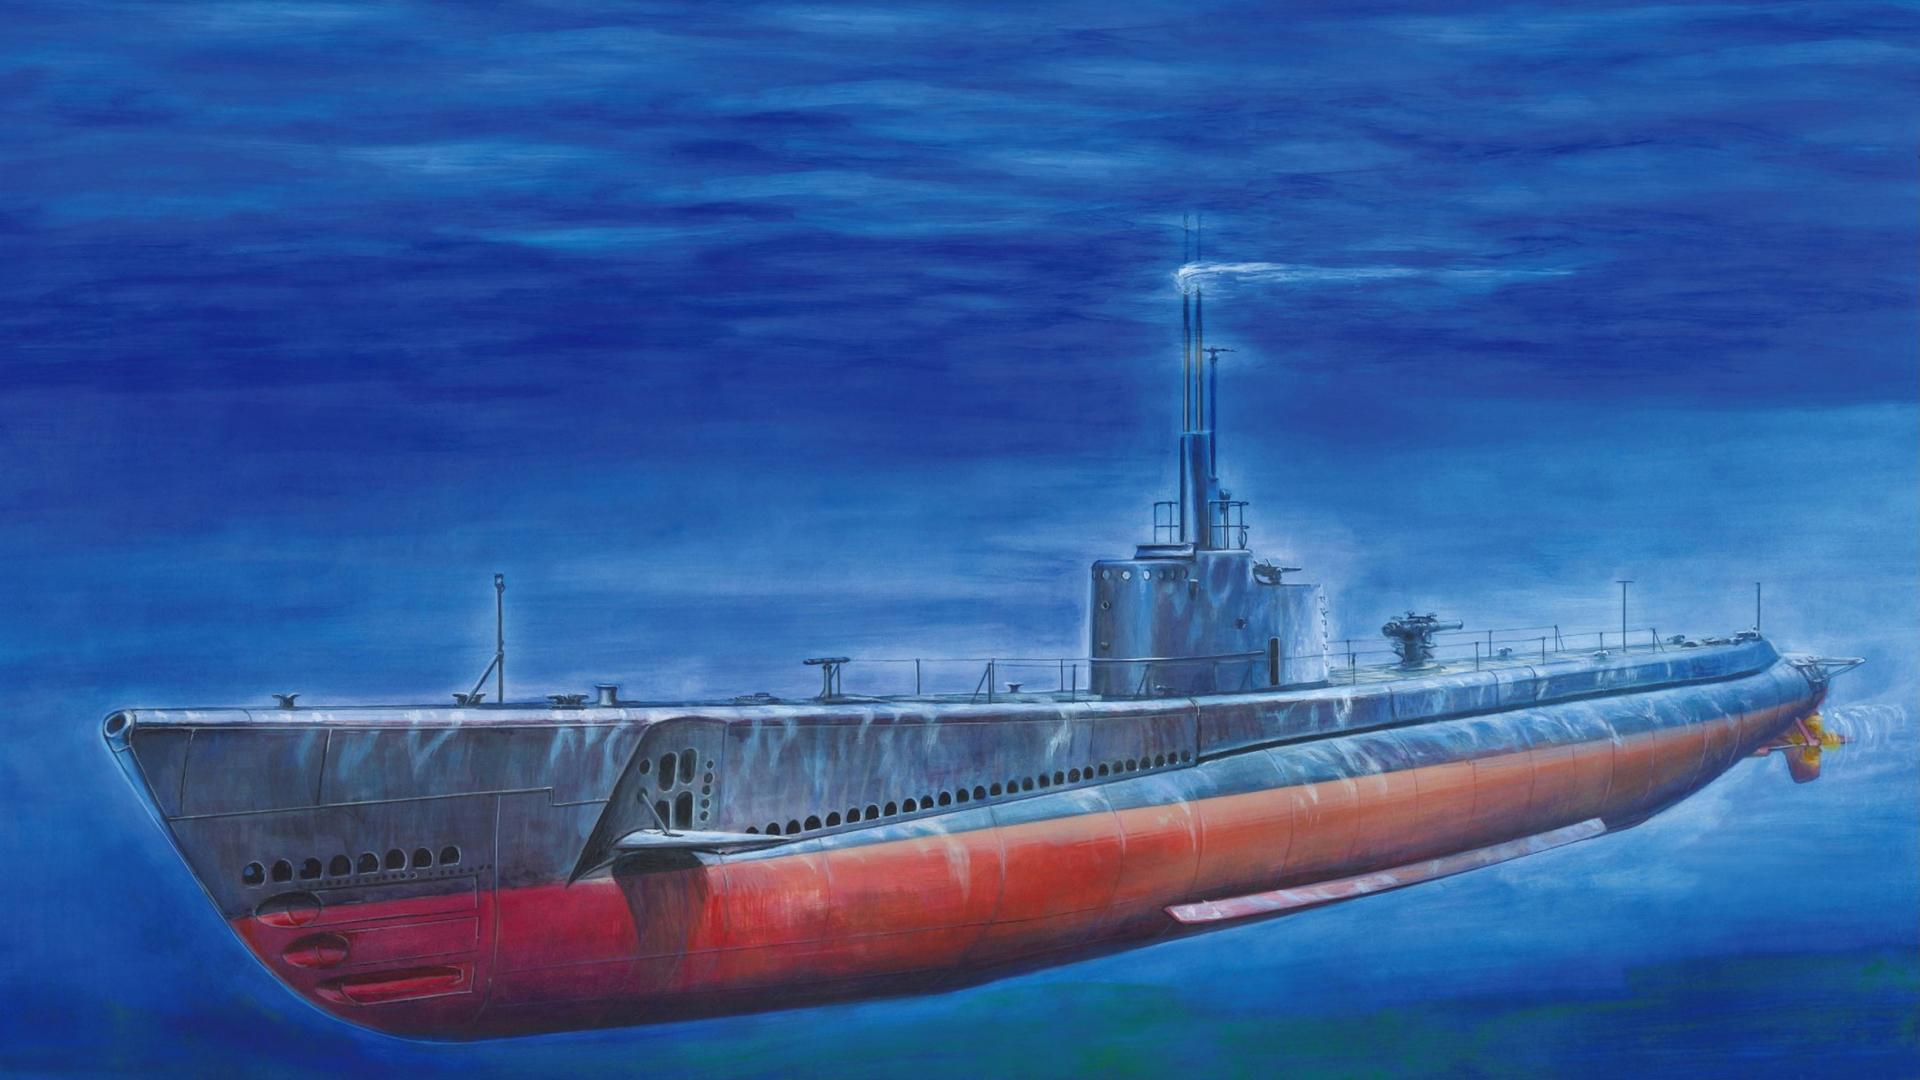 Submarine wallpaper and image, picture, photo